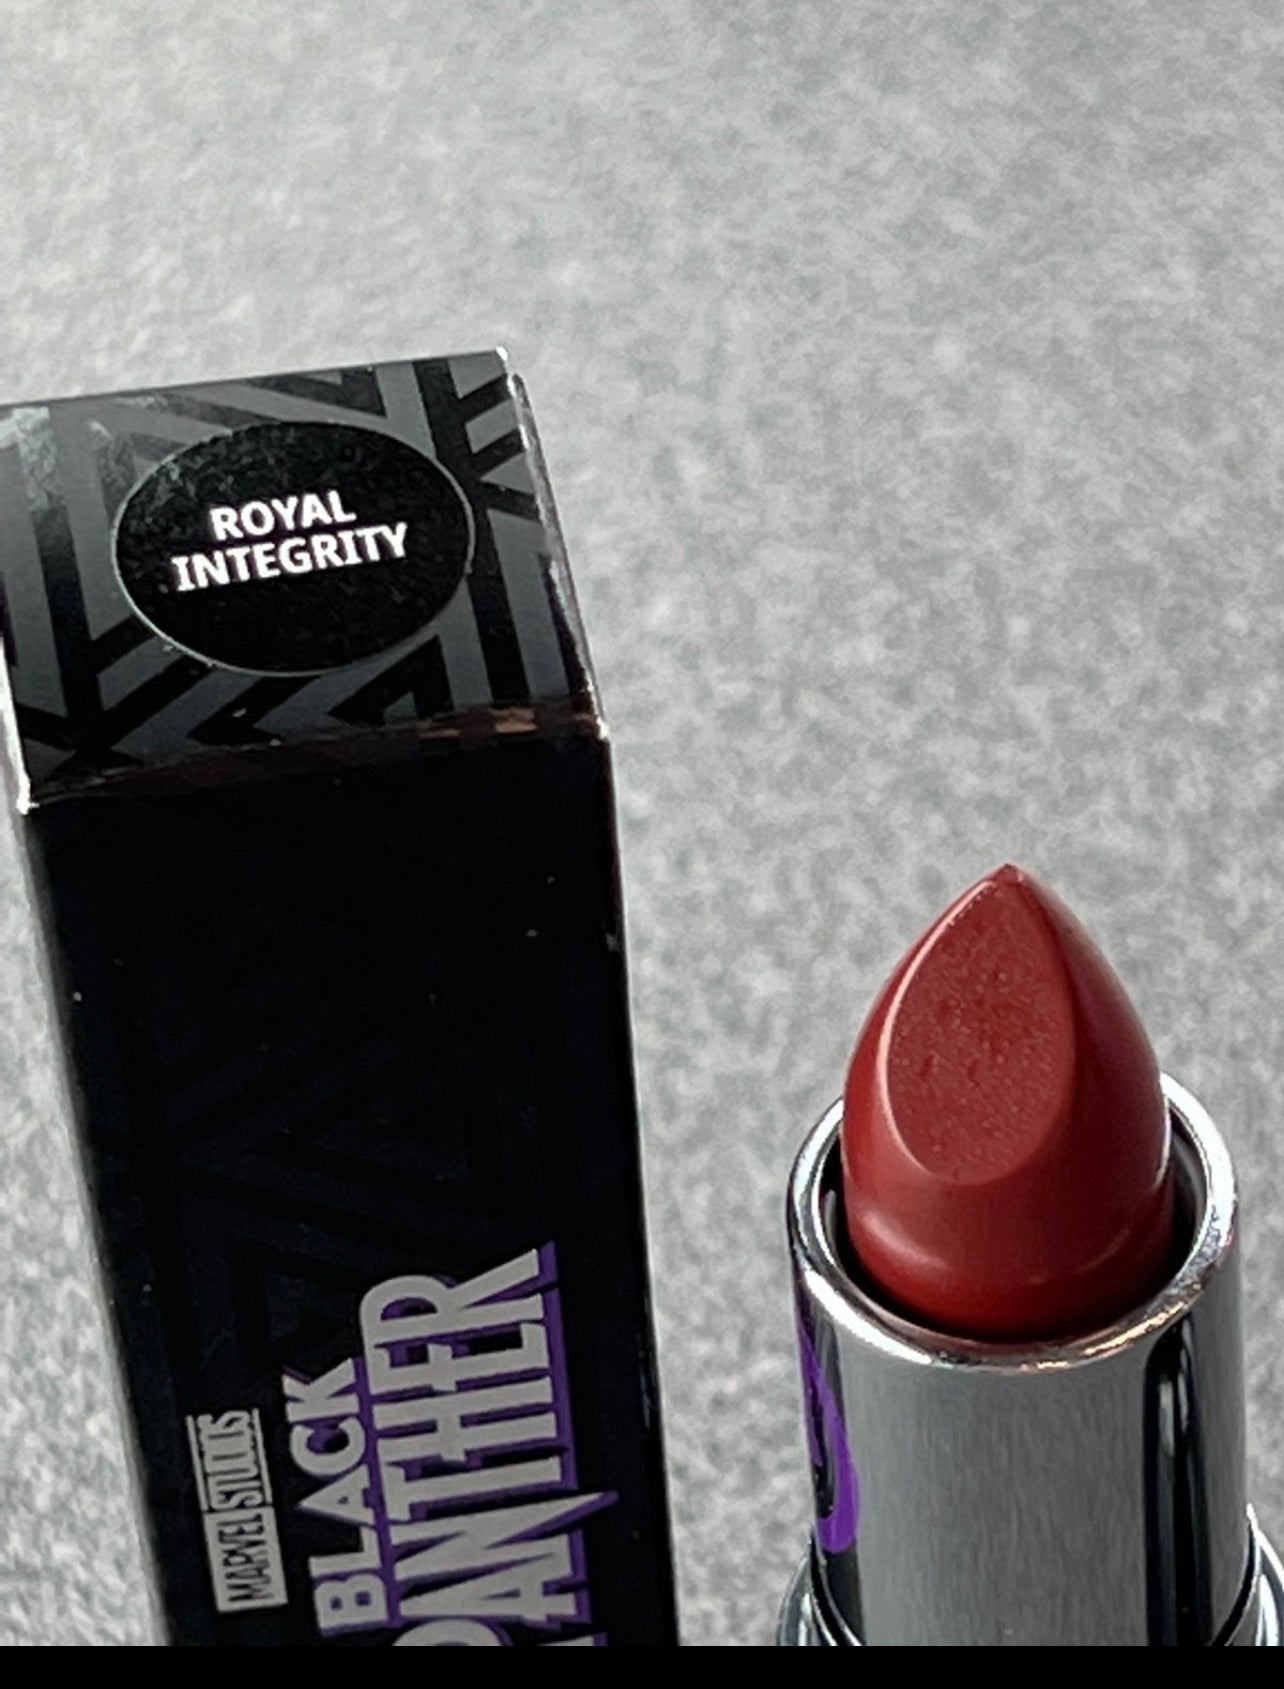 MAC Limited Edition Black Panther ROYAL INTEGRITY